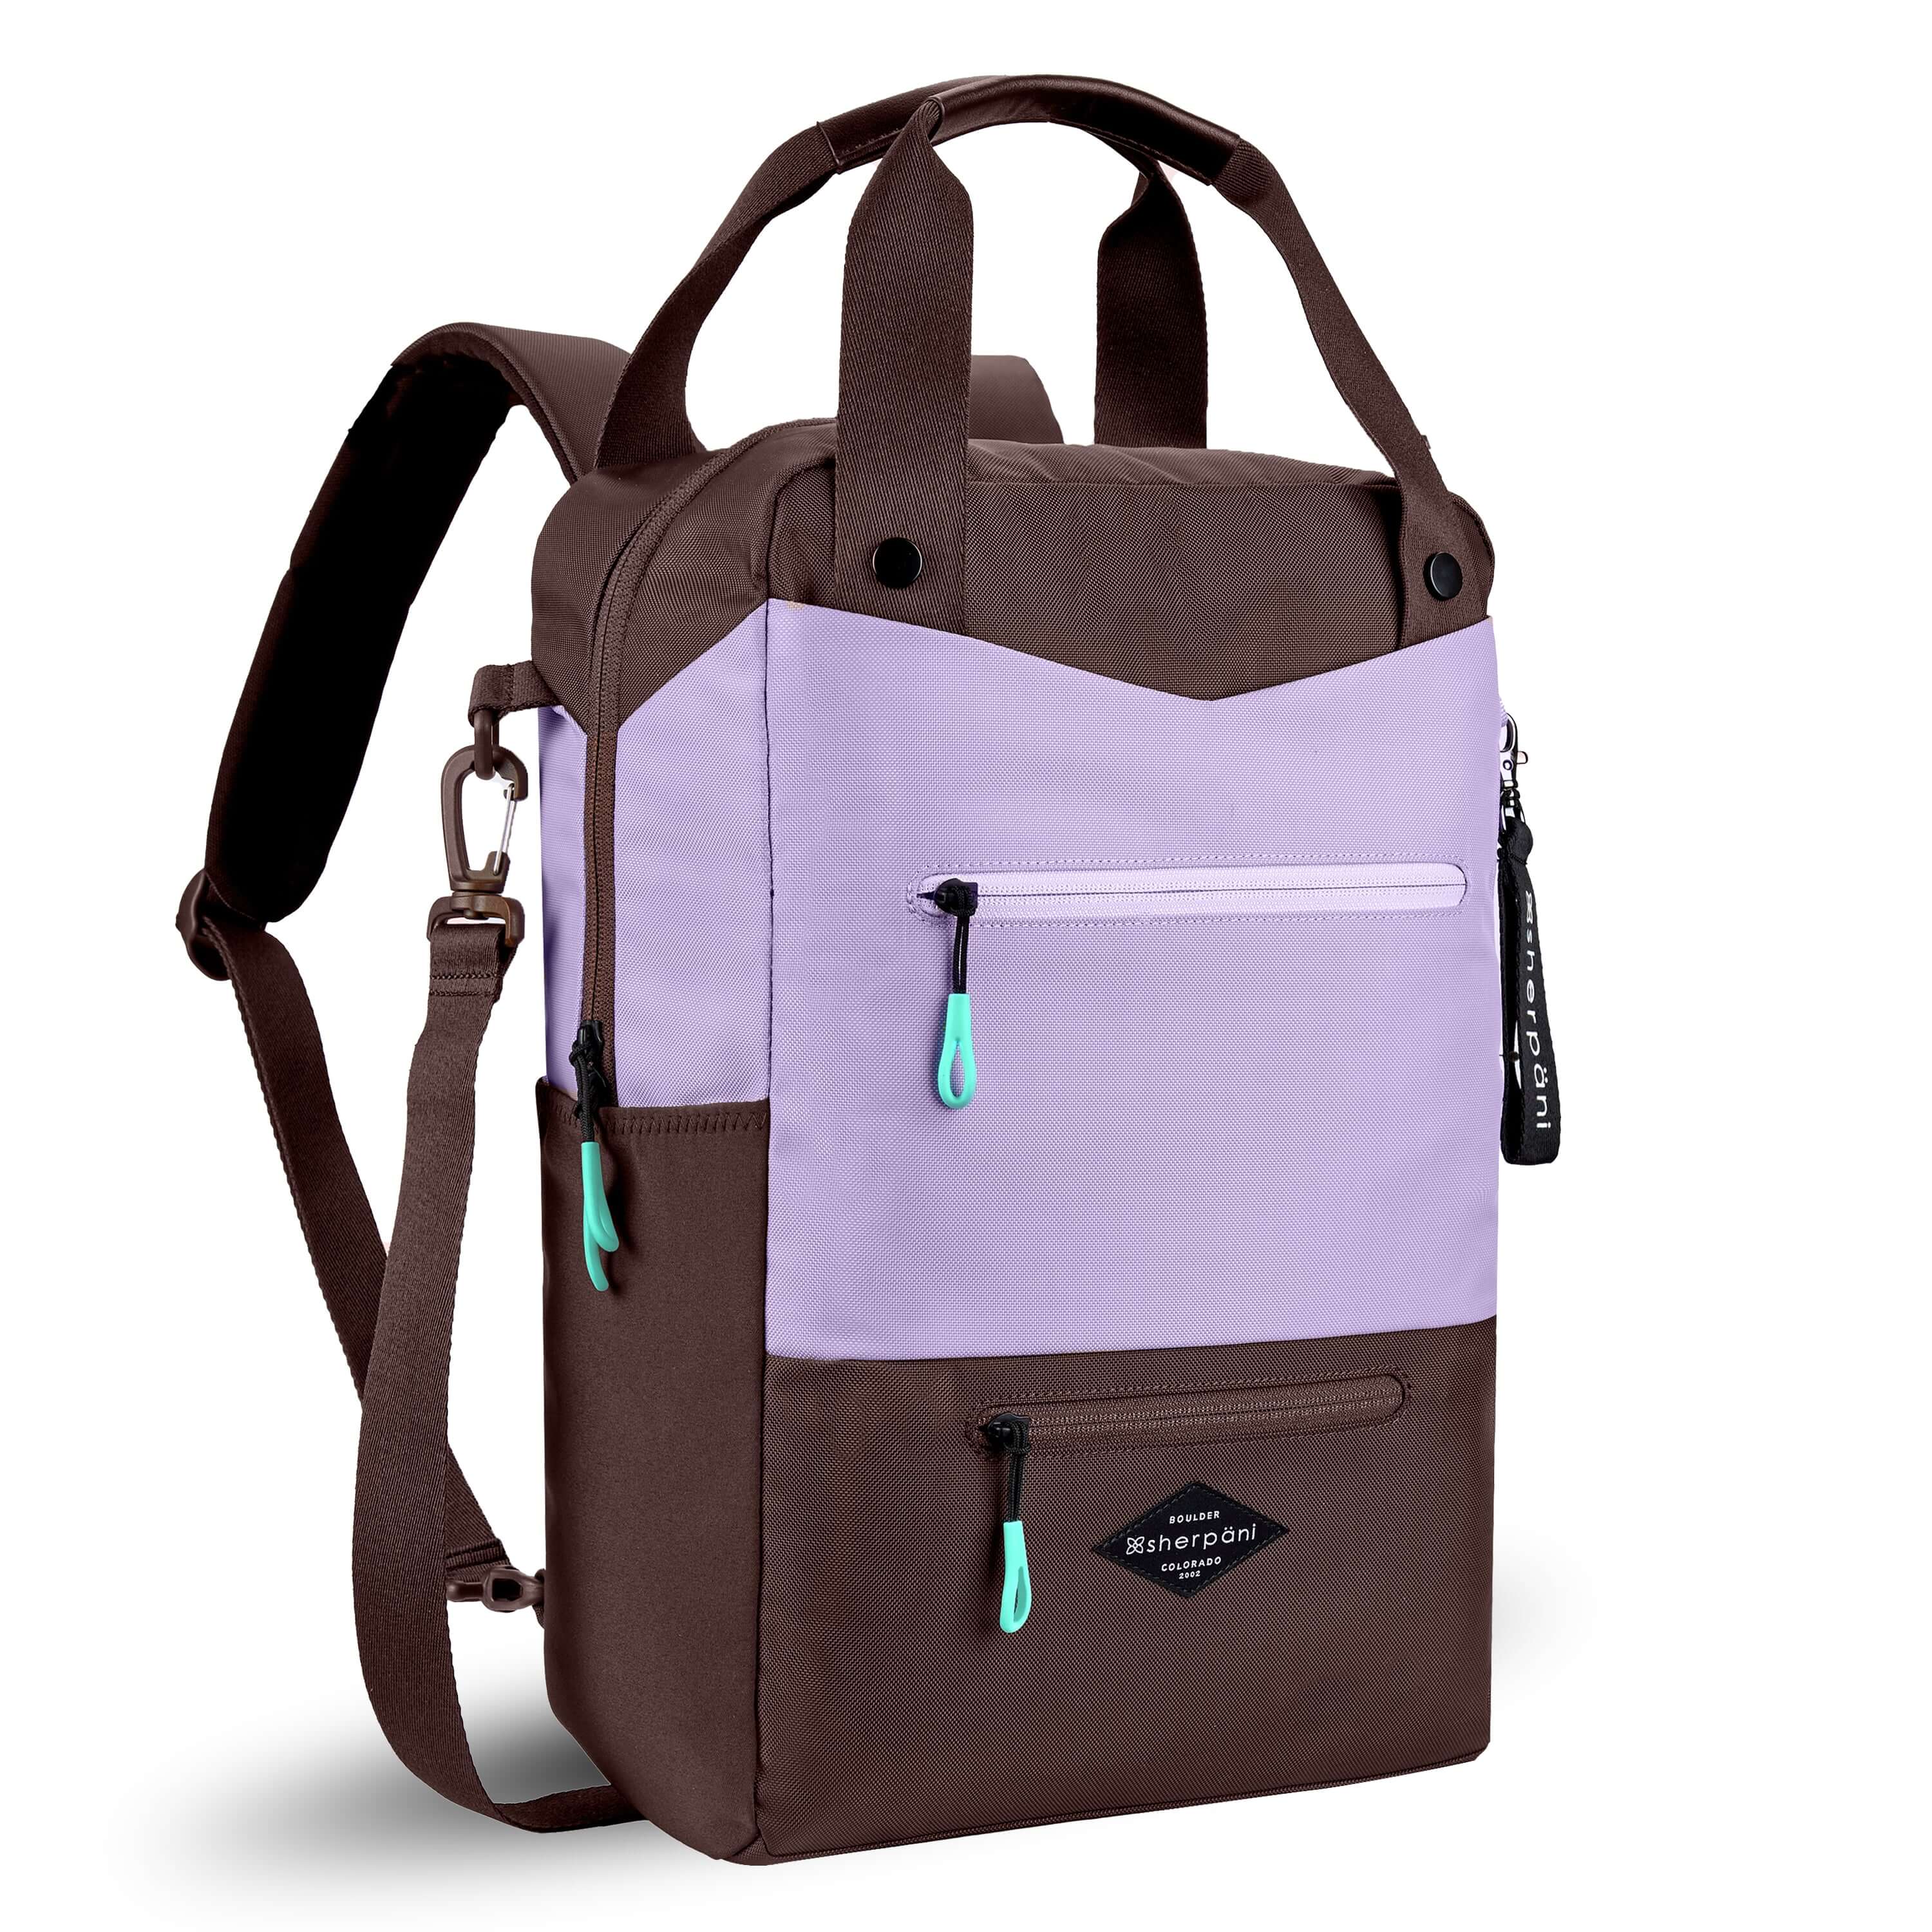 Angled front view of Sherpani's three-in-one bag, the Camden in Lavender. The bag is two-toned in lavender and brown. There are two external zipper pockets on the front panel with easy-pull zippers in aqua. A branded Sherpani keychain is clipped to the upper right corner. An elastic water bottle holder sits on either side of the bag. The bag has an adjustable/detachable crossbody strap, padded/adjustable backpack straps and short tote handles fixed at the top. 